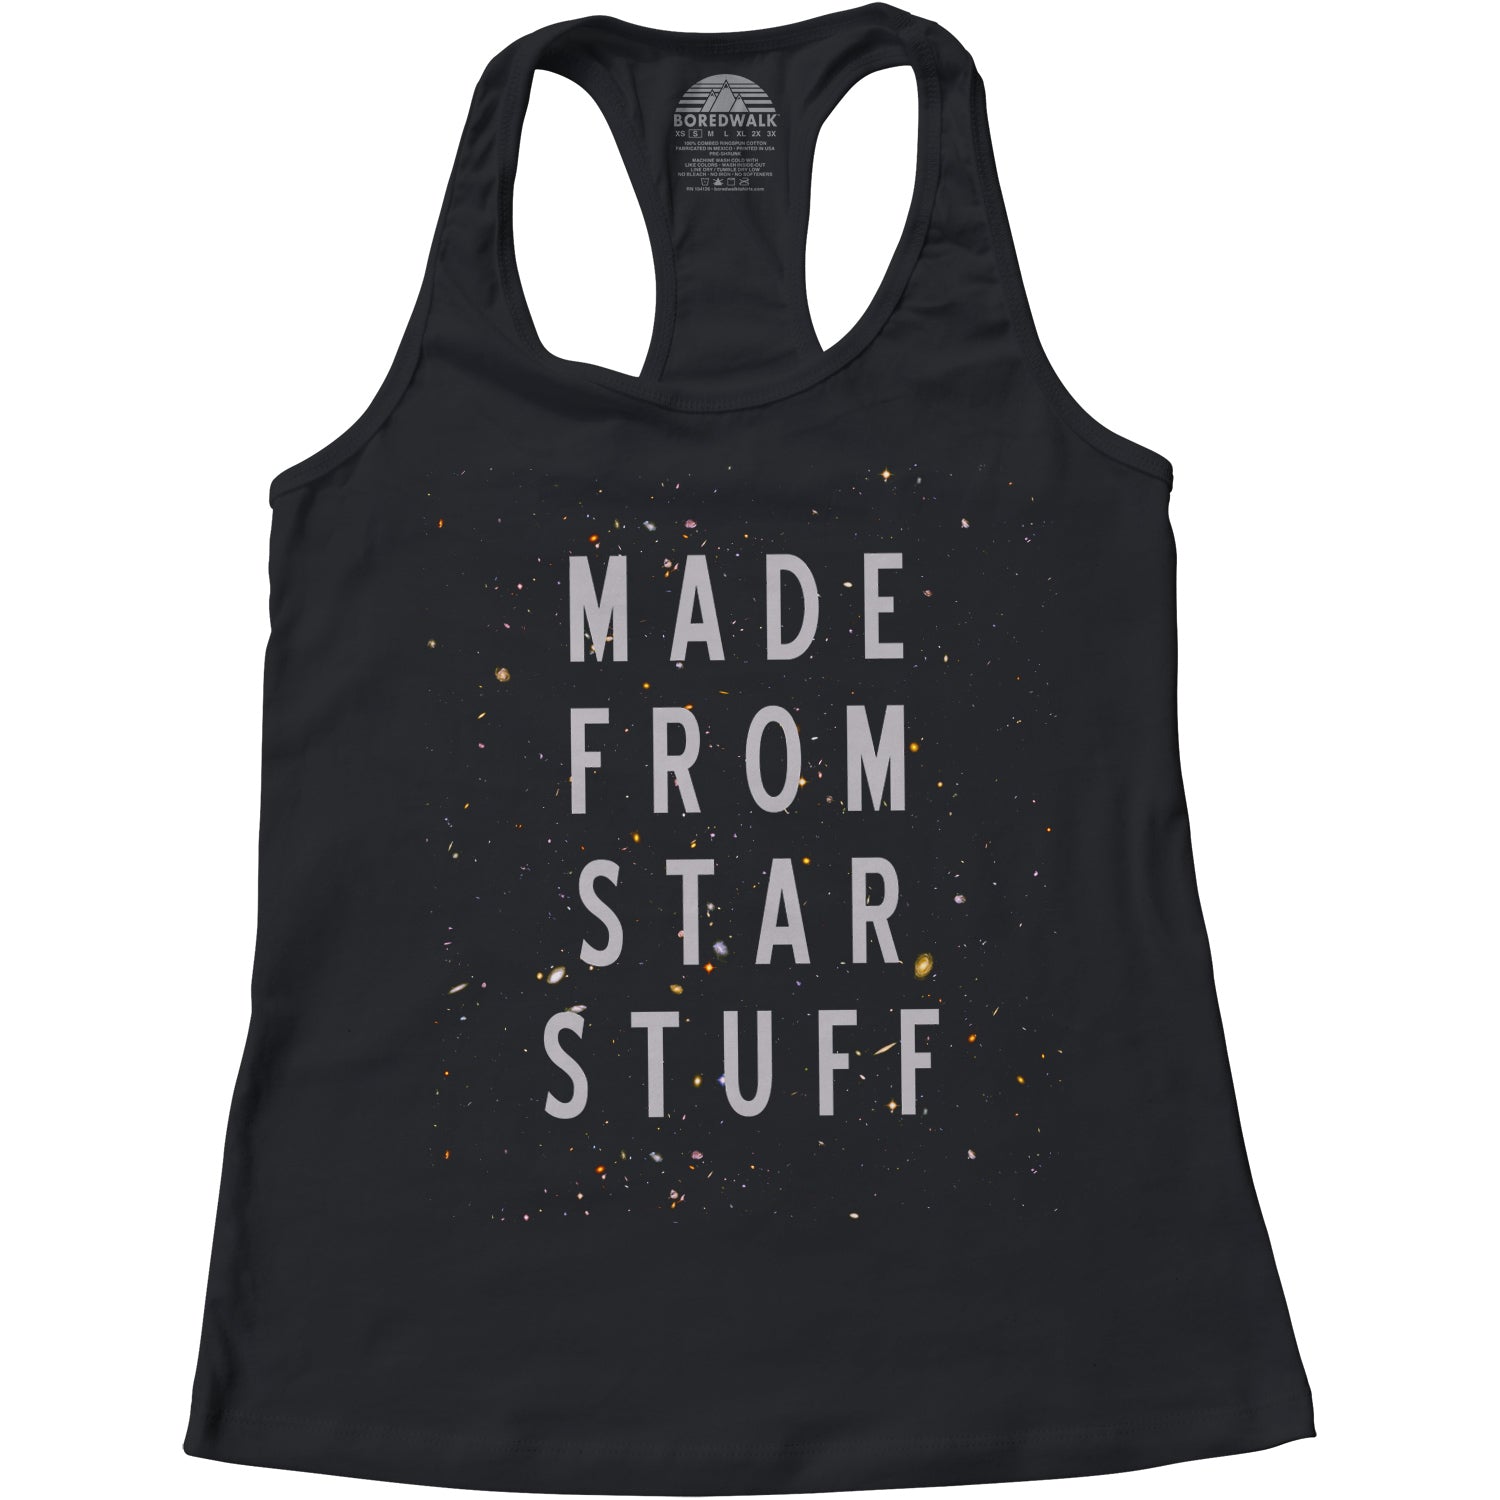 Women's Made From Star Stuff Astronomy Racerback Tank Top